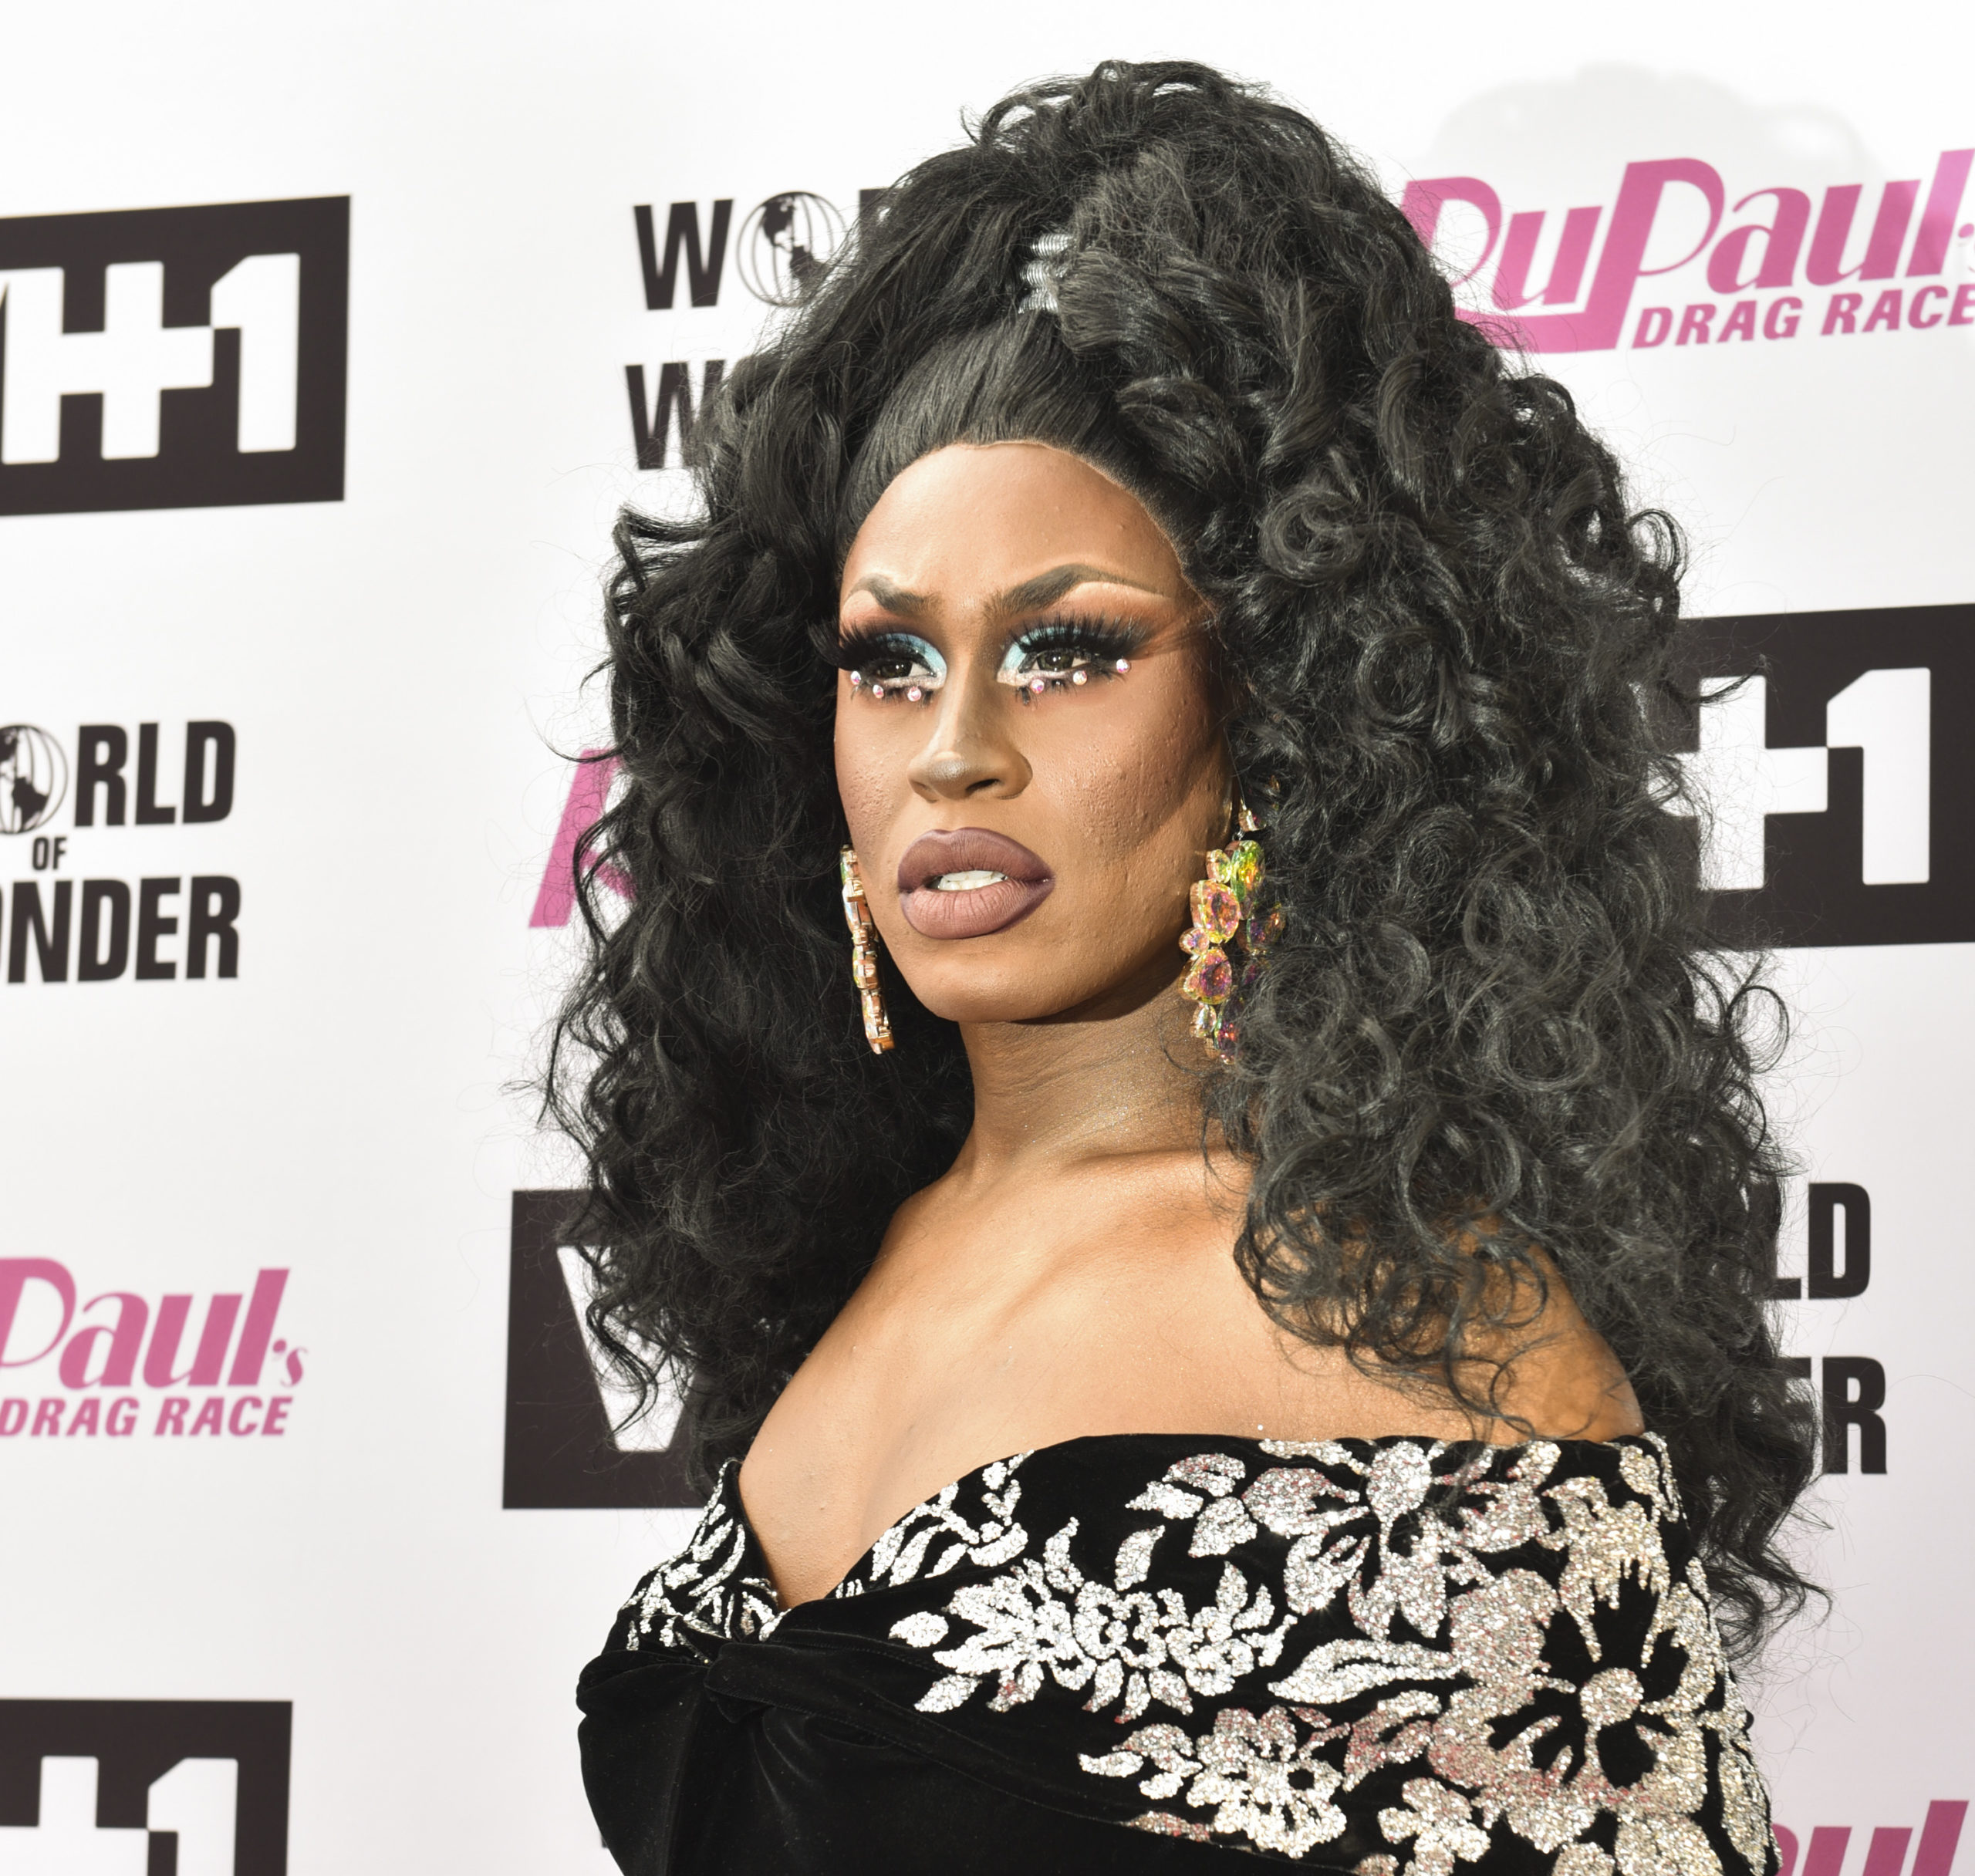 RuPaul's Drag Race' Star Shea Coulee Reveals Cousin Died Of